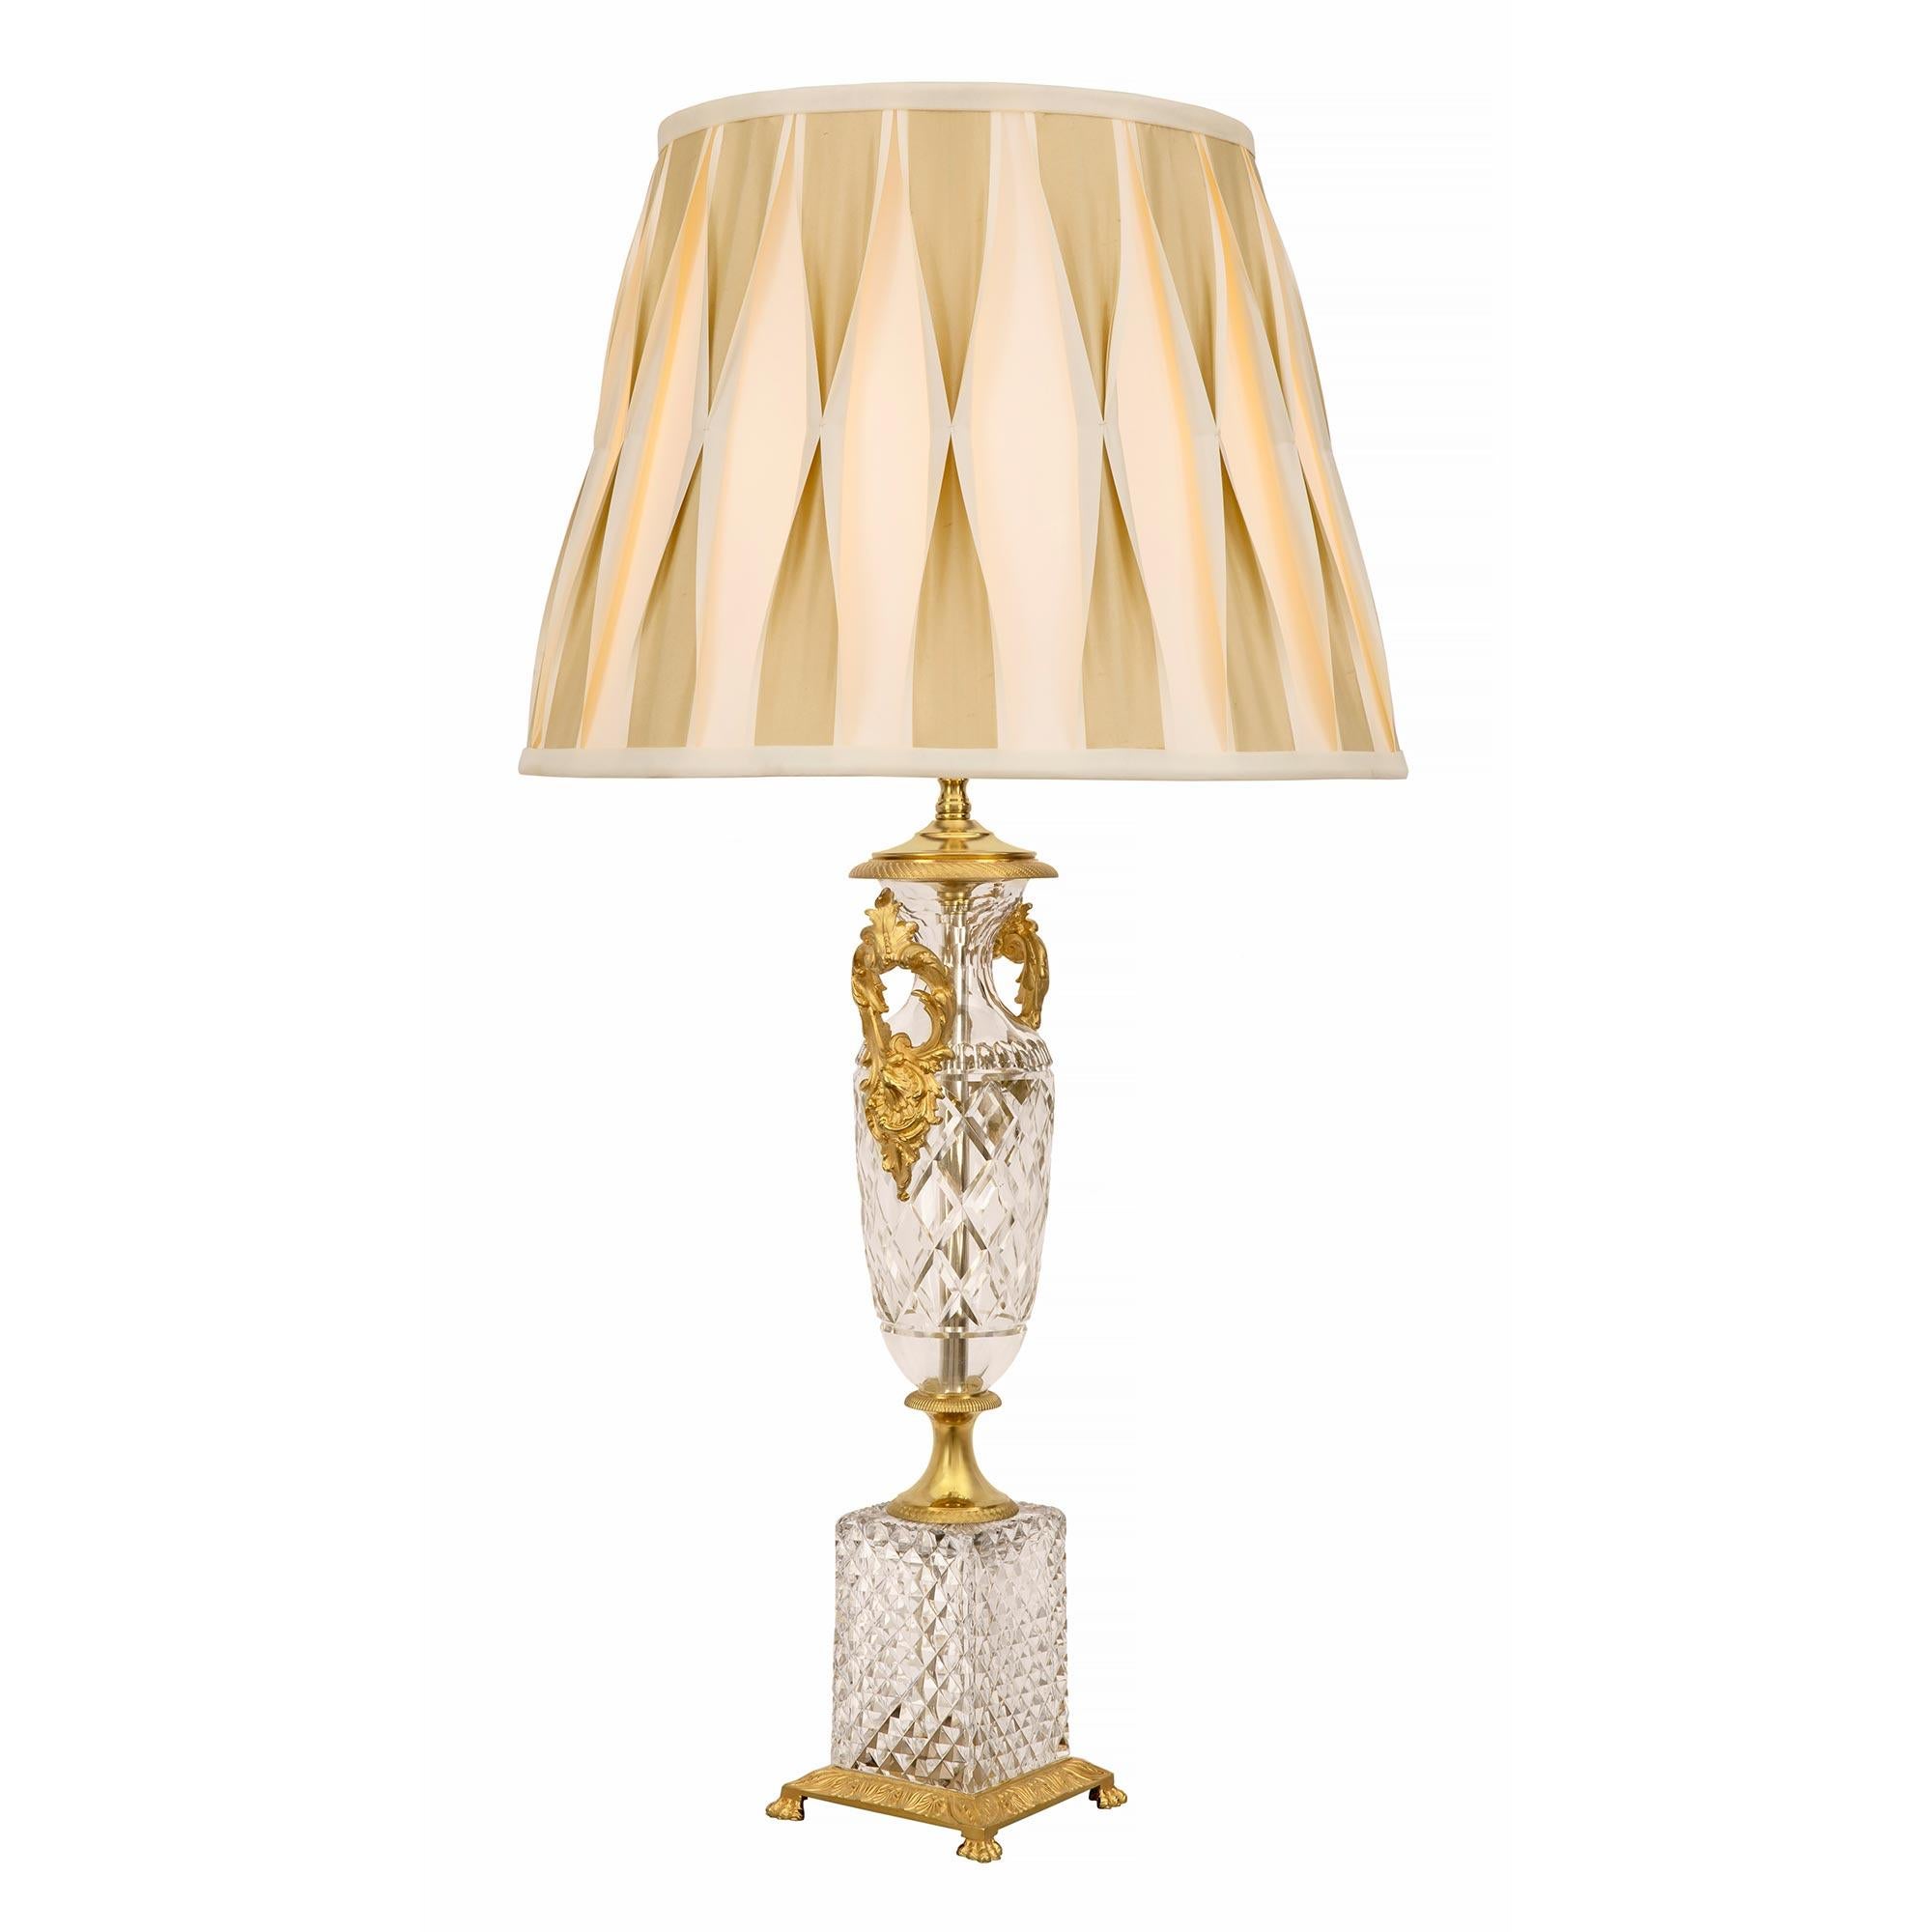 A most elegant pair of French 19th century Neo-Classical st. ormolu and Baccarat crystal lamps. Each lamp is raised by a beautiful square cut crystal base with a beautiful wrap around bottom ormolu band with handsome paw feet. Above the socle